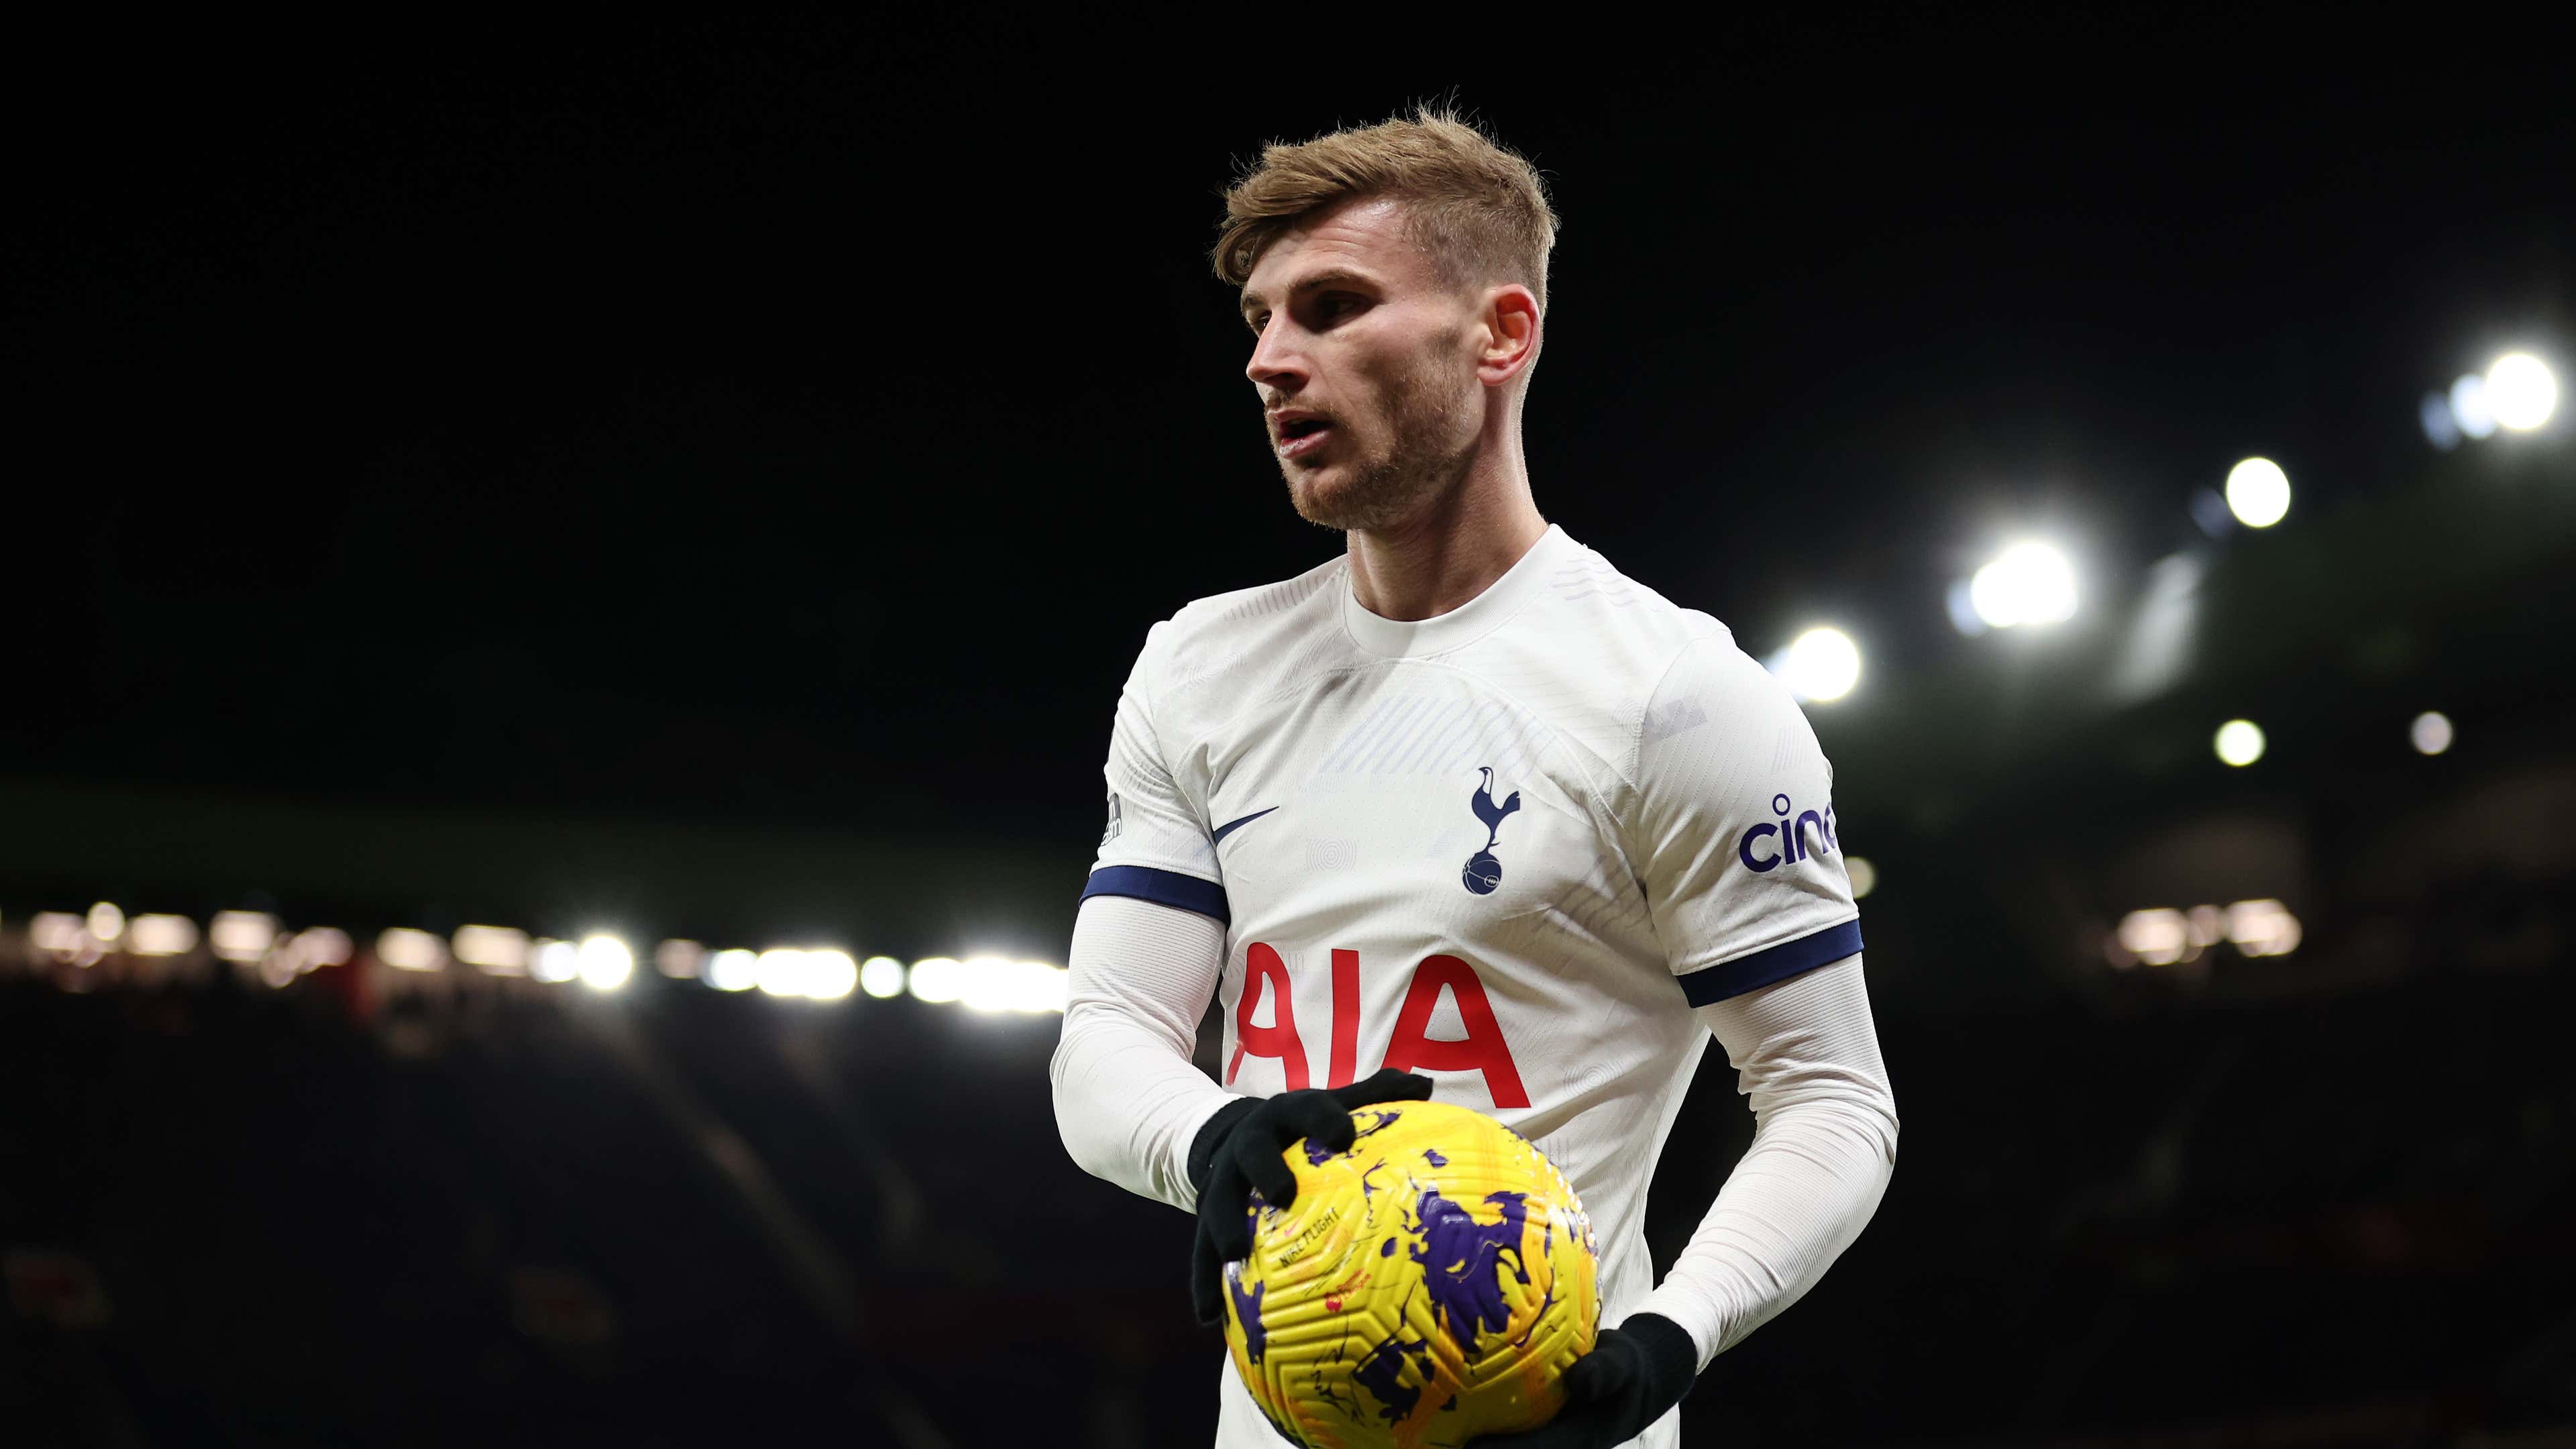 Timo Werner could play better than he has at Tottenham.